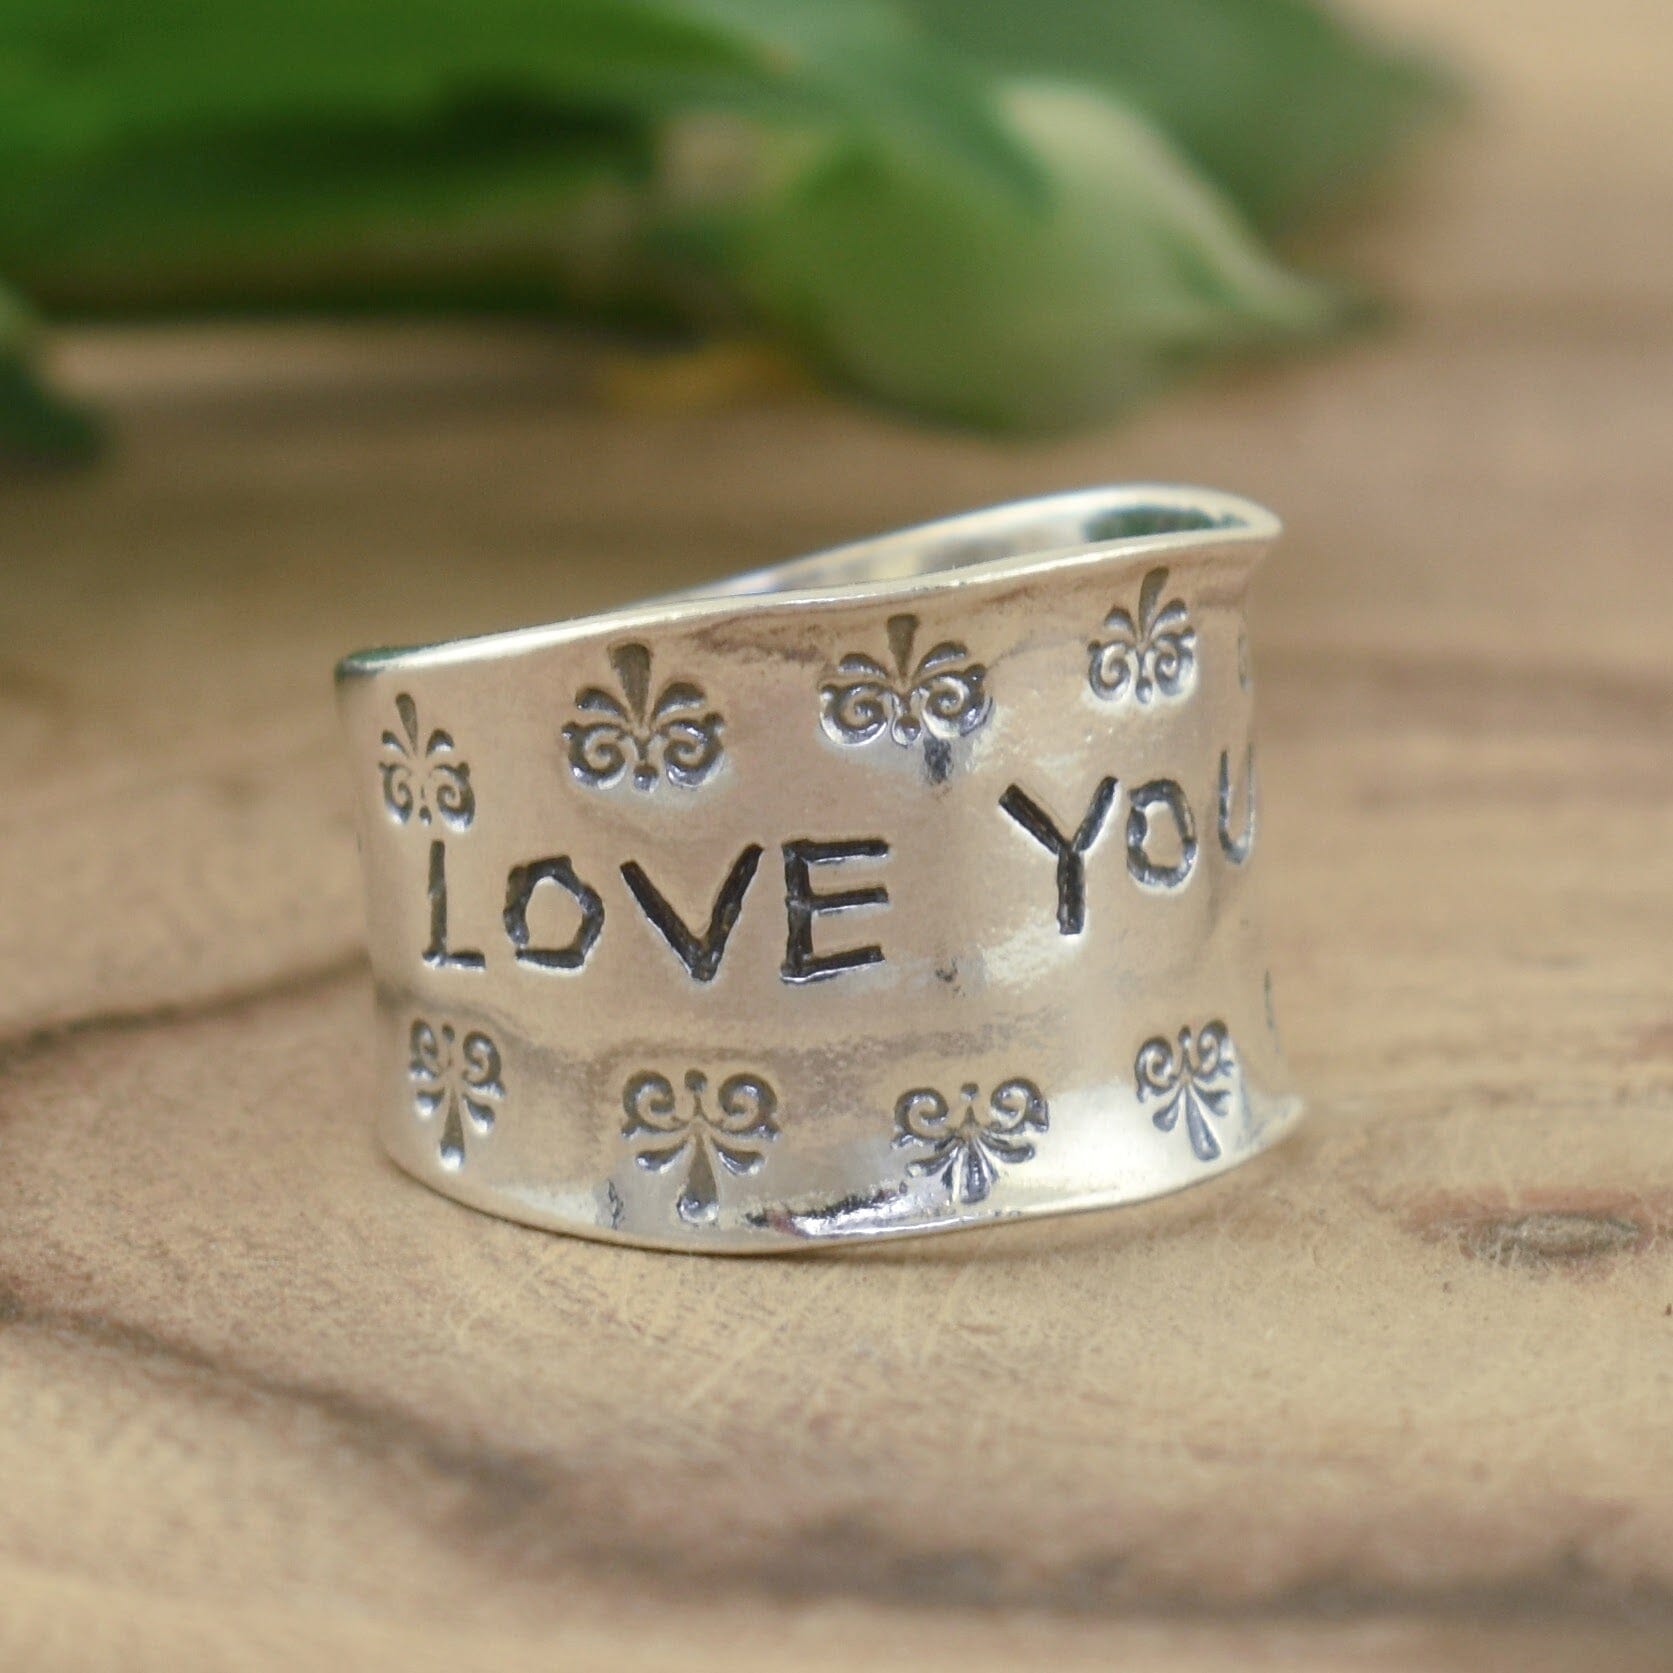 Wide band sterling silver ring engraved with "Love You More"